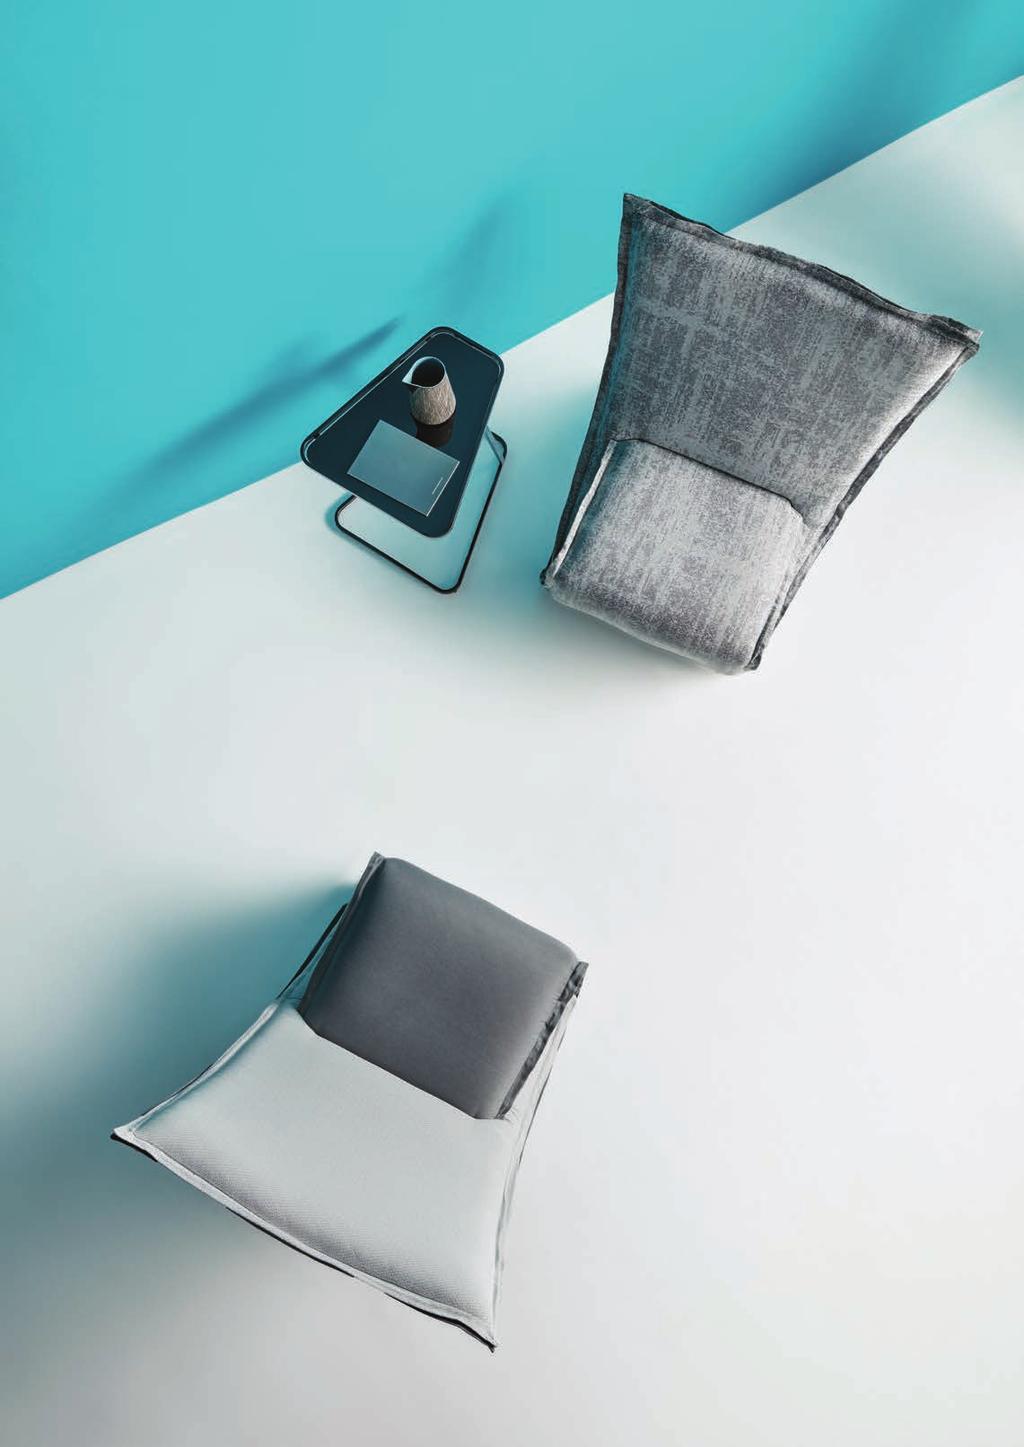 fold design by Andreas Varotsos Can a straight line be transformed into a comfortable armchair?